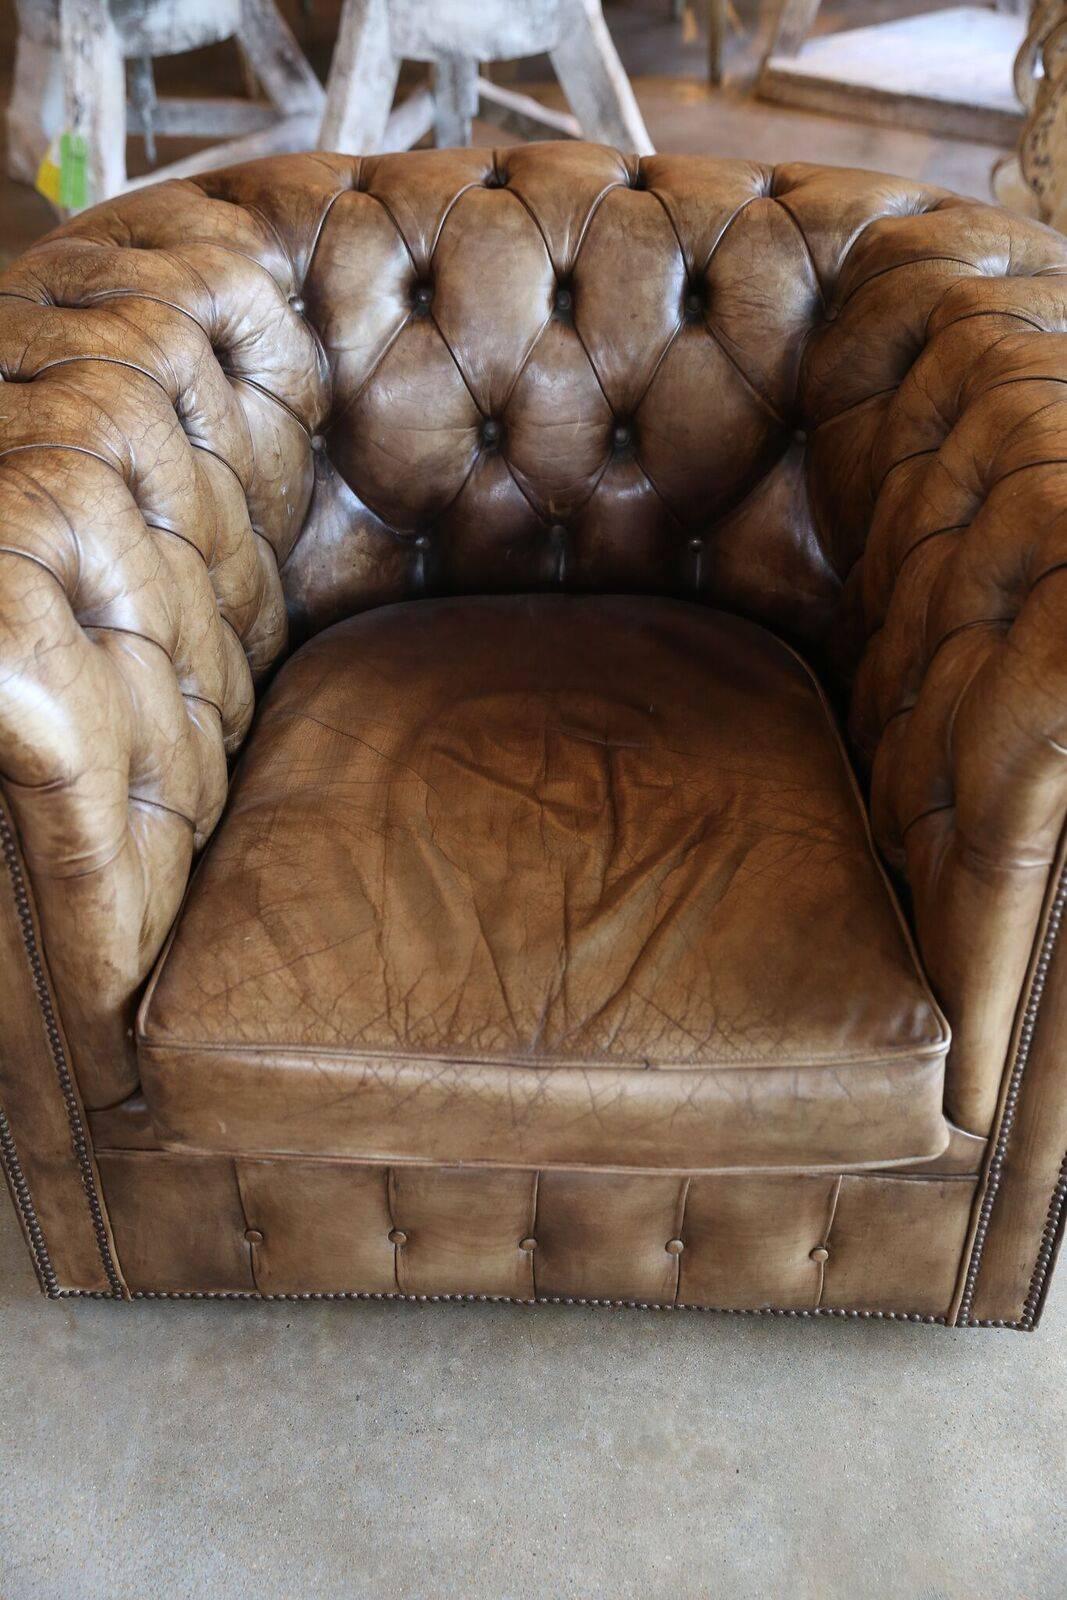 This Chesterfield chair brings a timeless sophistication to any sitting space with it’s cushioned leather seat, tufted upholstery, and roll arms. As comfortable as it is enticing, this piece is sure to be a favorite in any space.
 